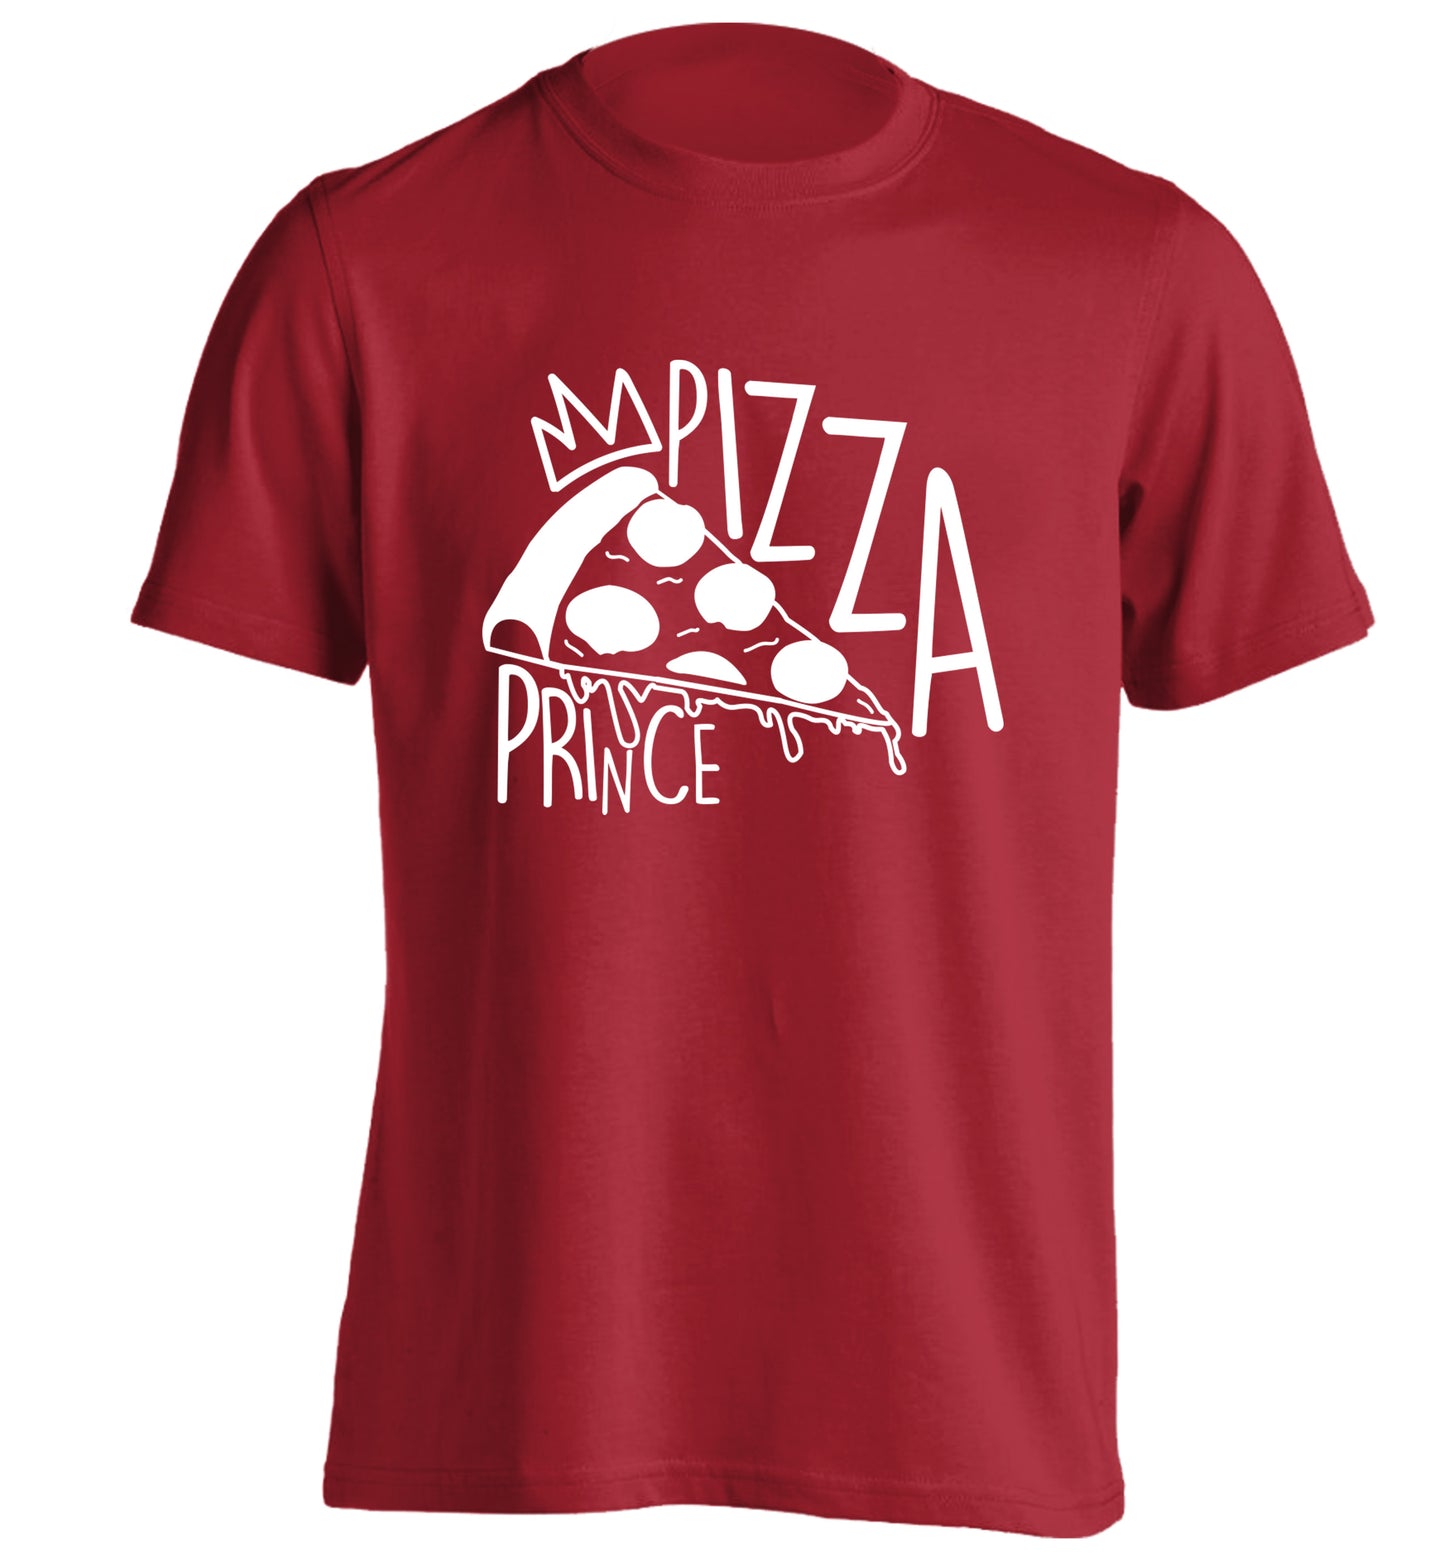 Pizza Prince adults unisex red Tshirt 2XL